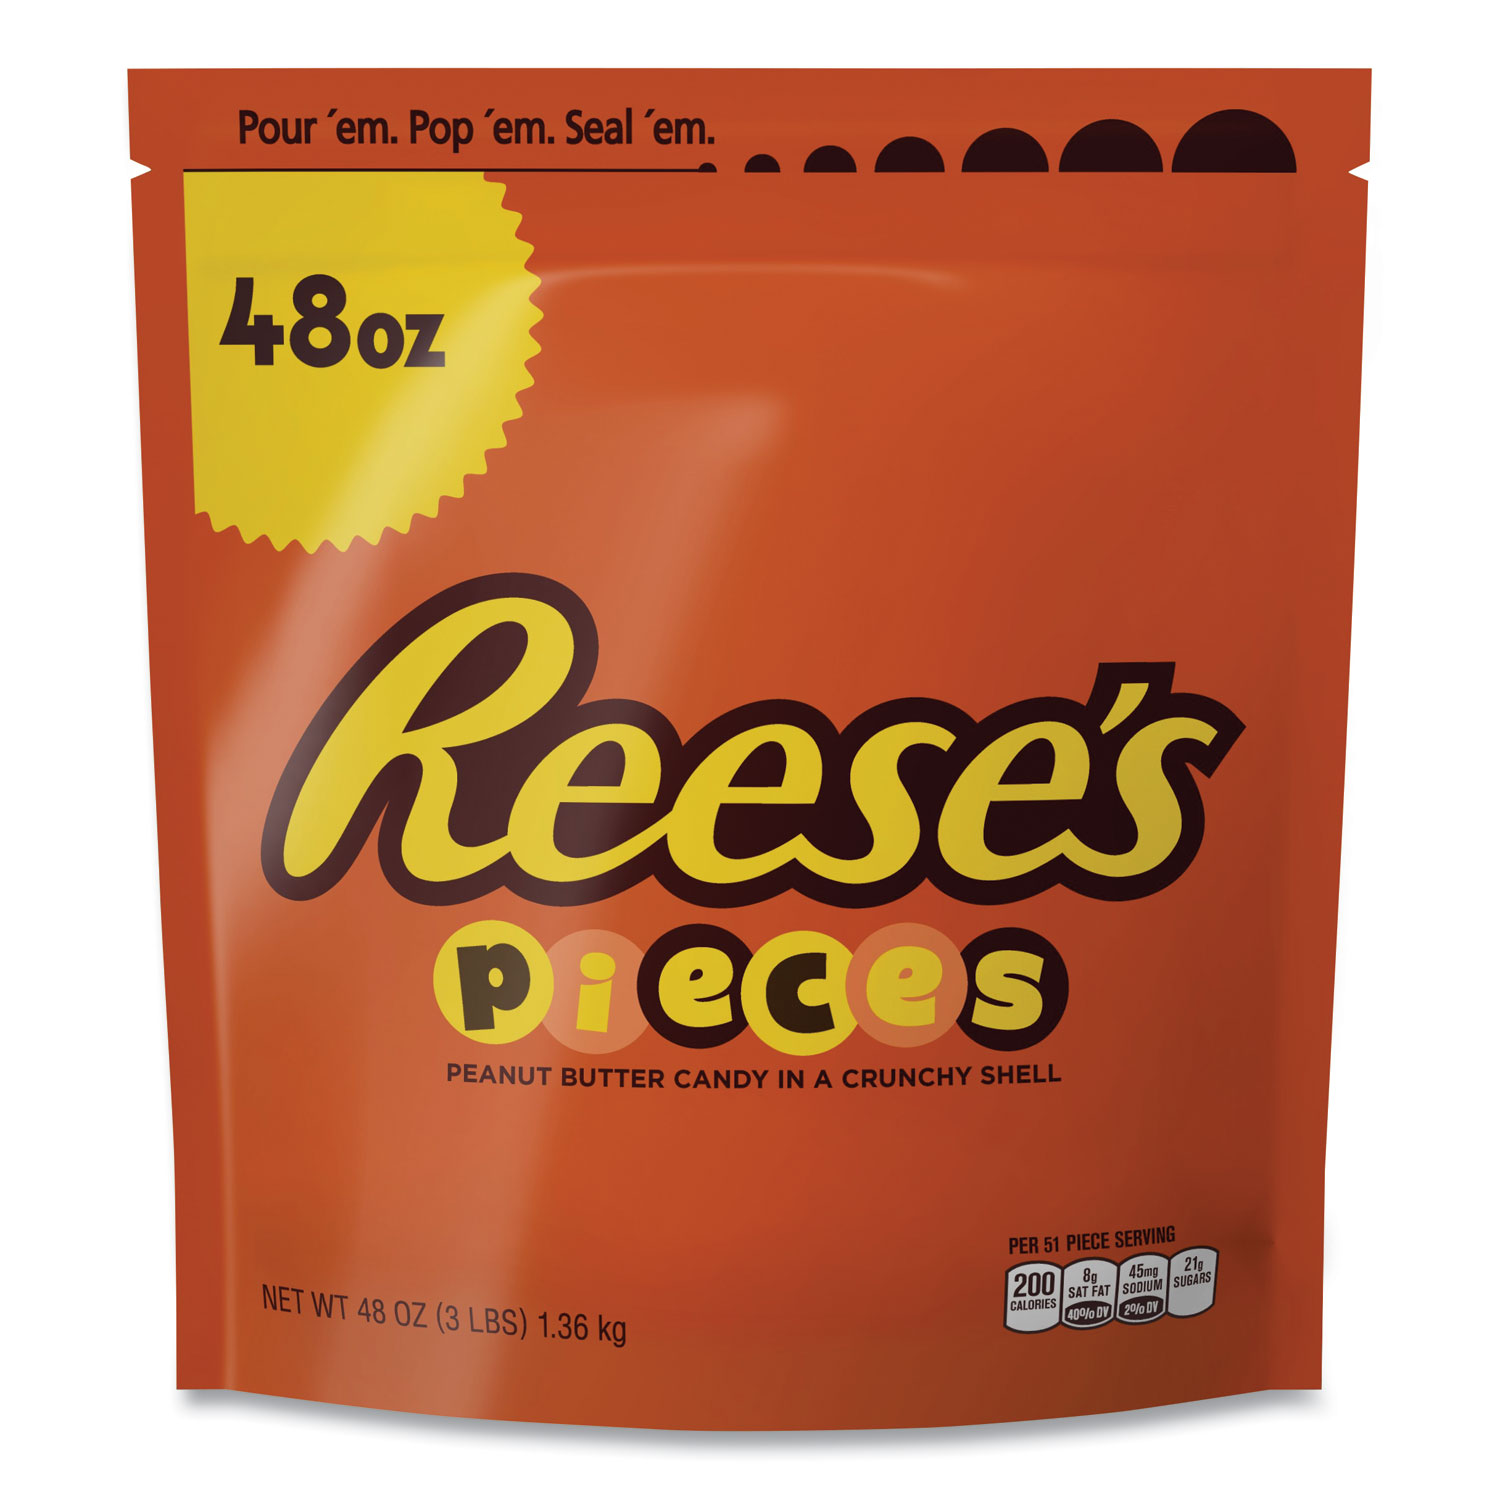  Reese's 11436 Pieces Candy, Resealable Bag, 48 oz Bag, 2 Bags/Pack, Free Delivery in 1-4 Business Days (GRR24600145) 